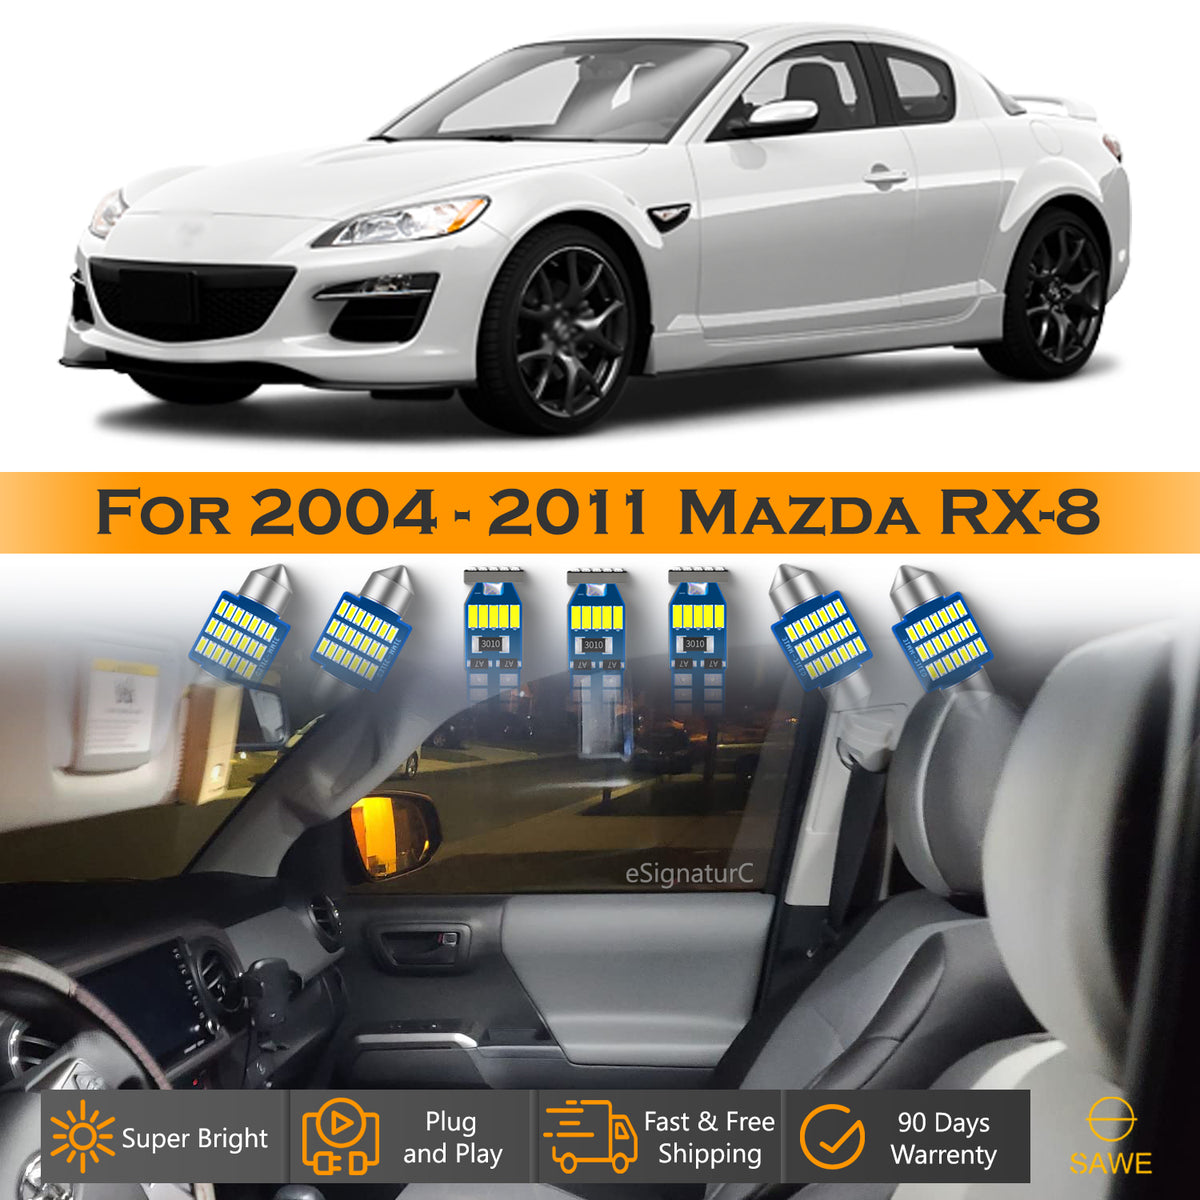 For Mazda RX8 RX-8 Interior LED Lights - Dome & Map Light Bulbs Package Kit for 2004 - 2011 - White